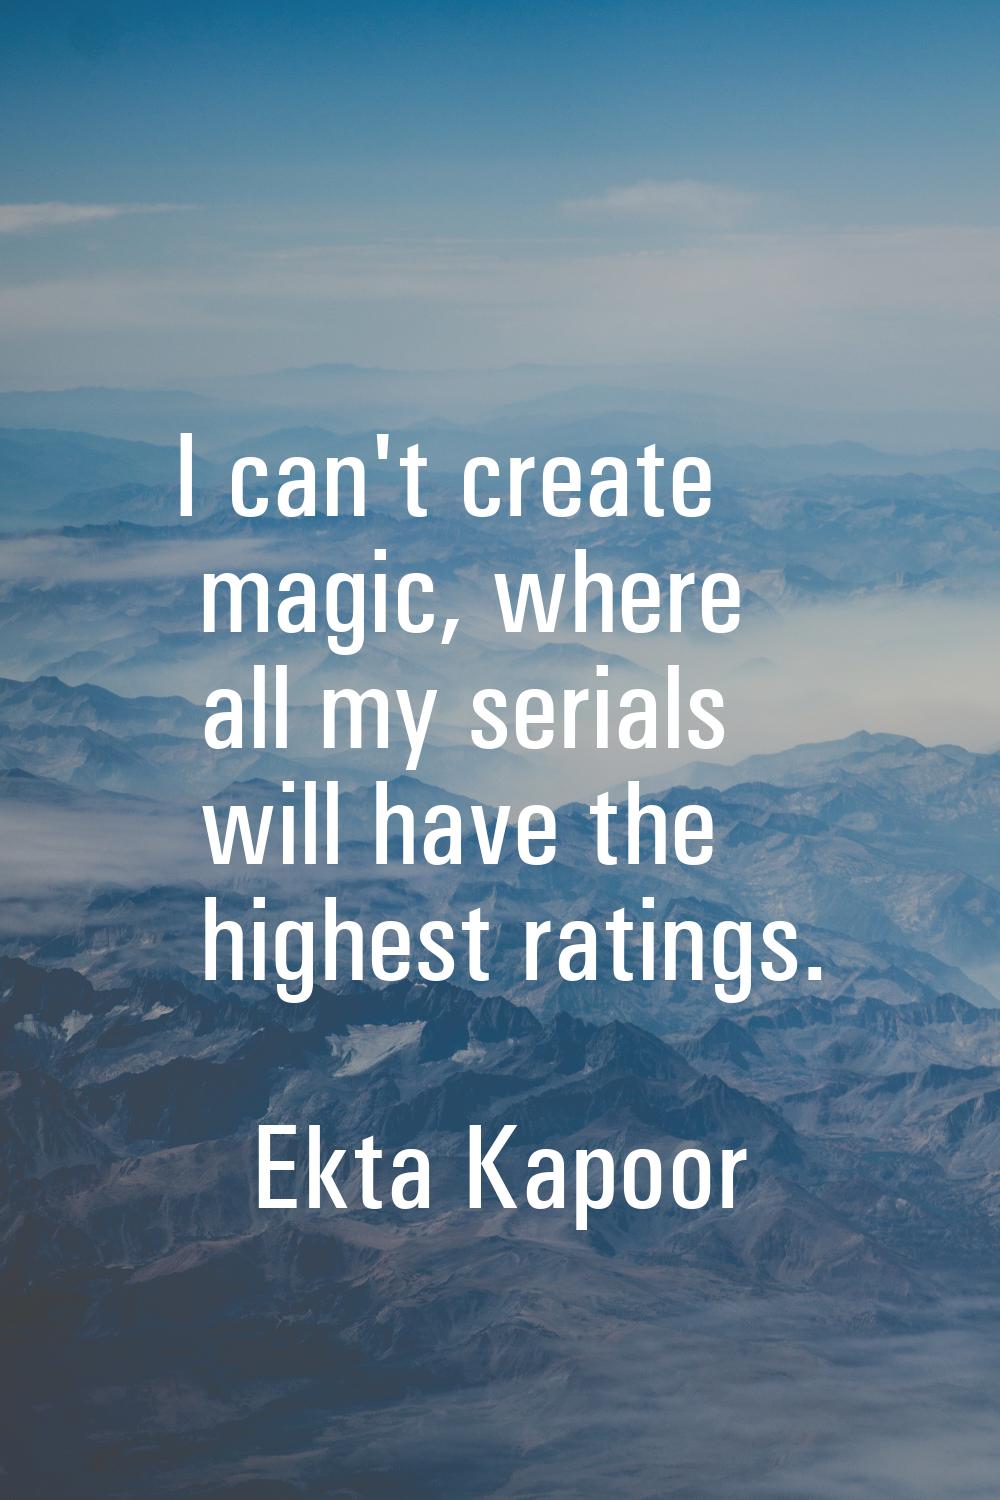 I can't create magic, where all my serials will have the highest ratings.